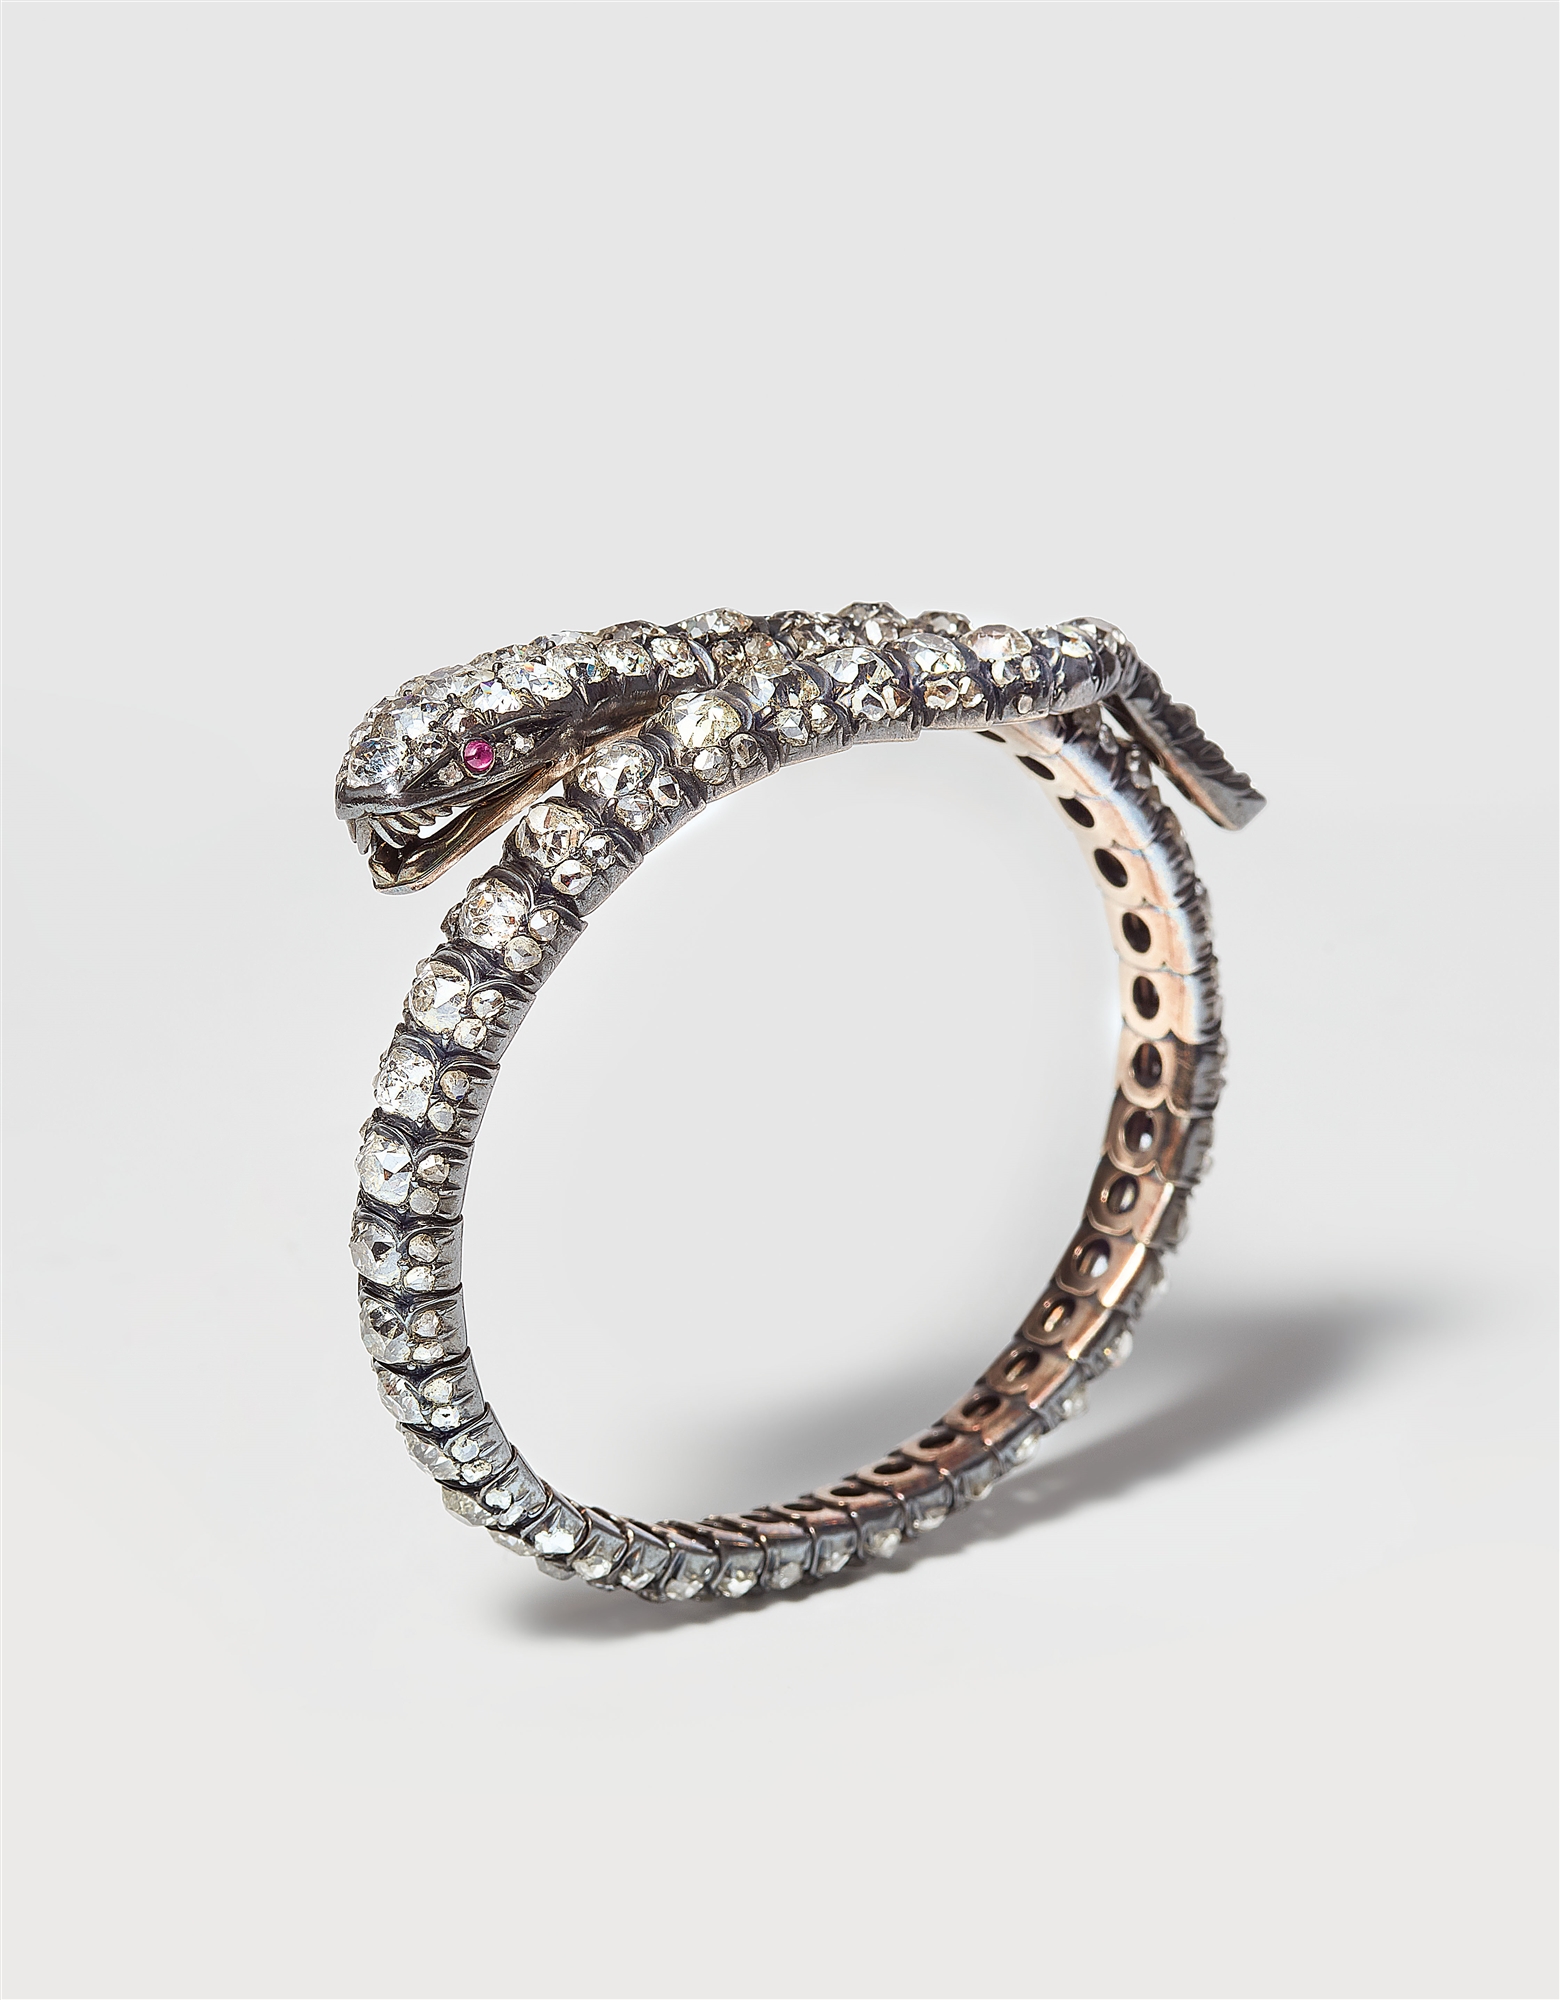 A Victorian 14k gold silver and European old-cut diamond snake bangle.